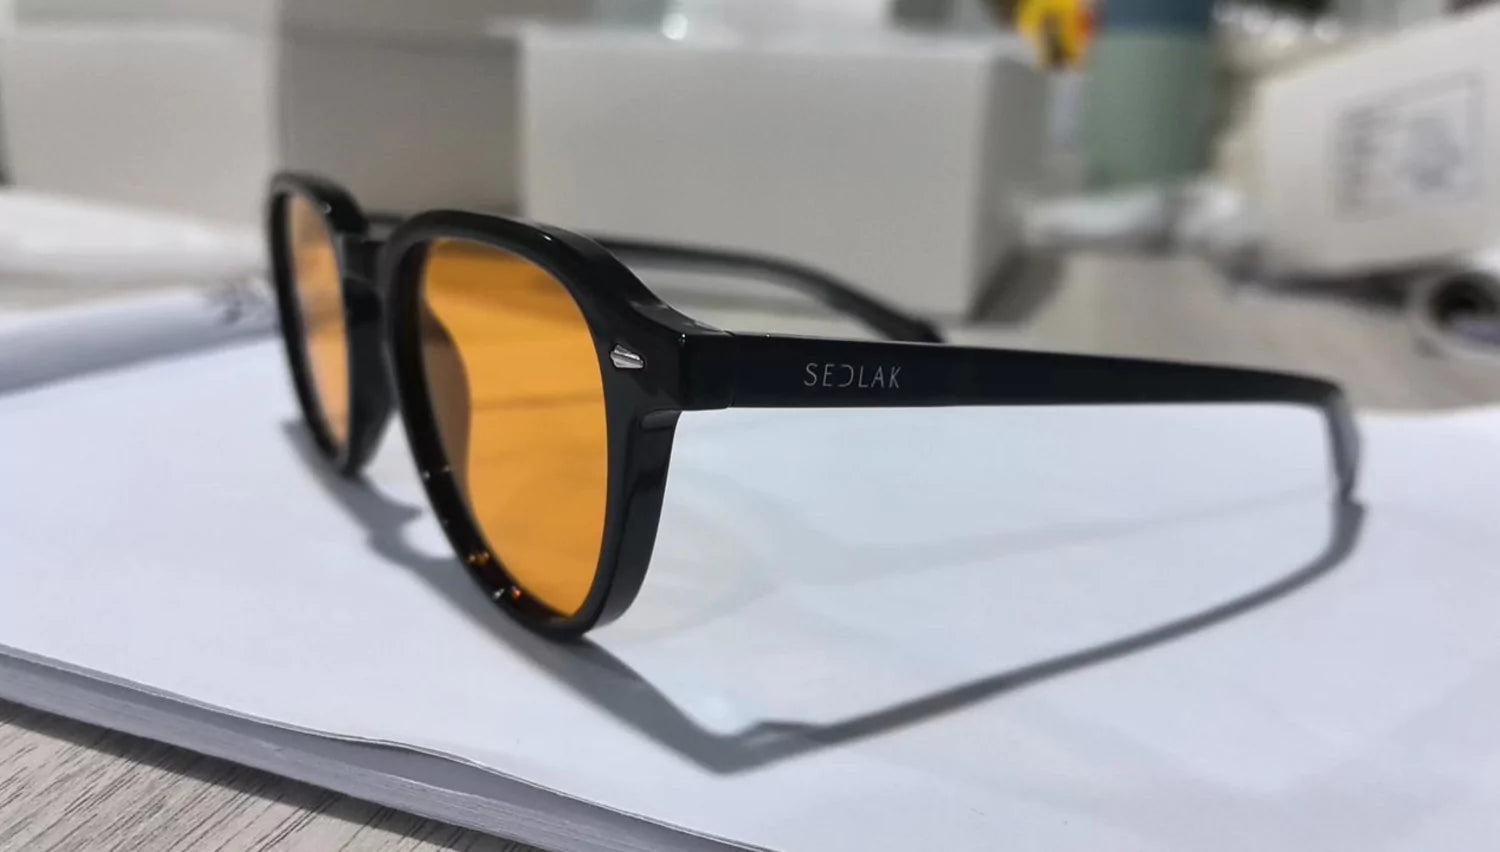 Pair of black-framed sunglasses with amber lenses on a white surface.